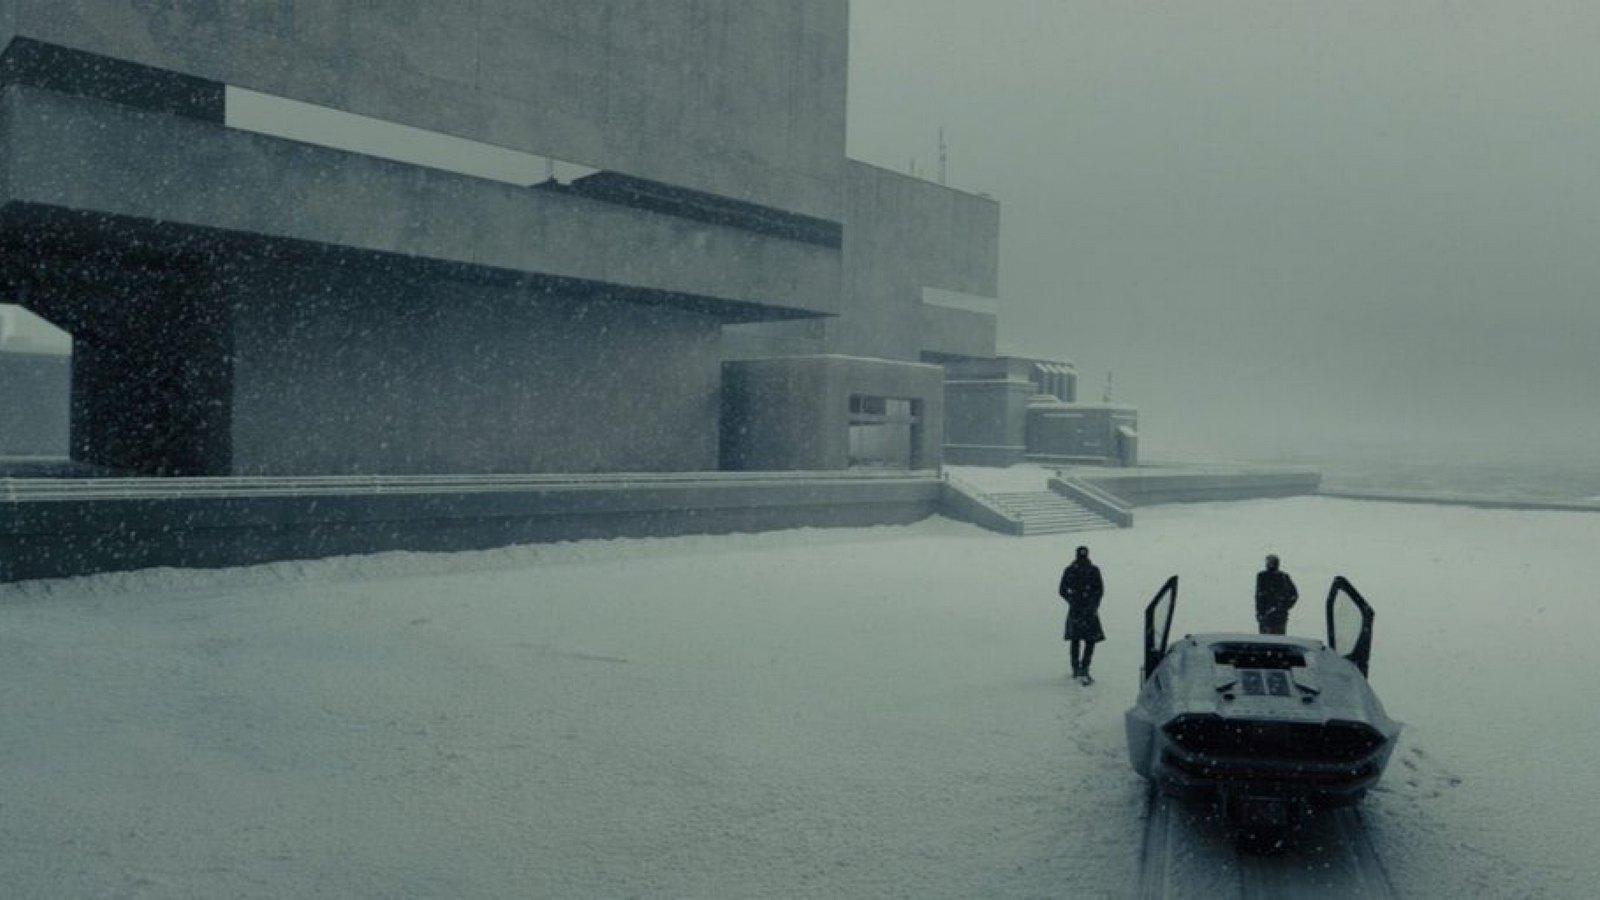 Brutalism in Architecture - 6 Examples of Movies with Brutalist Buildings - Sheet4